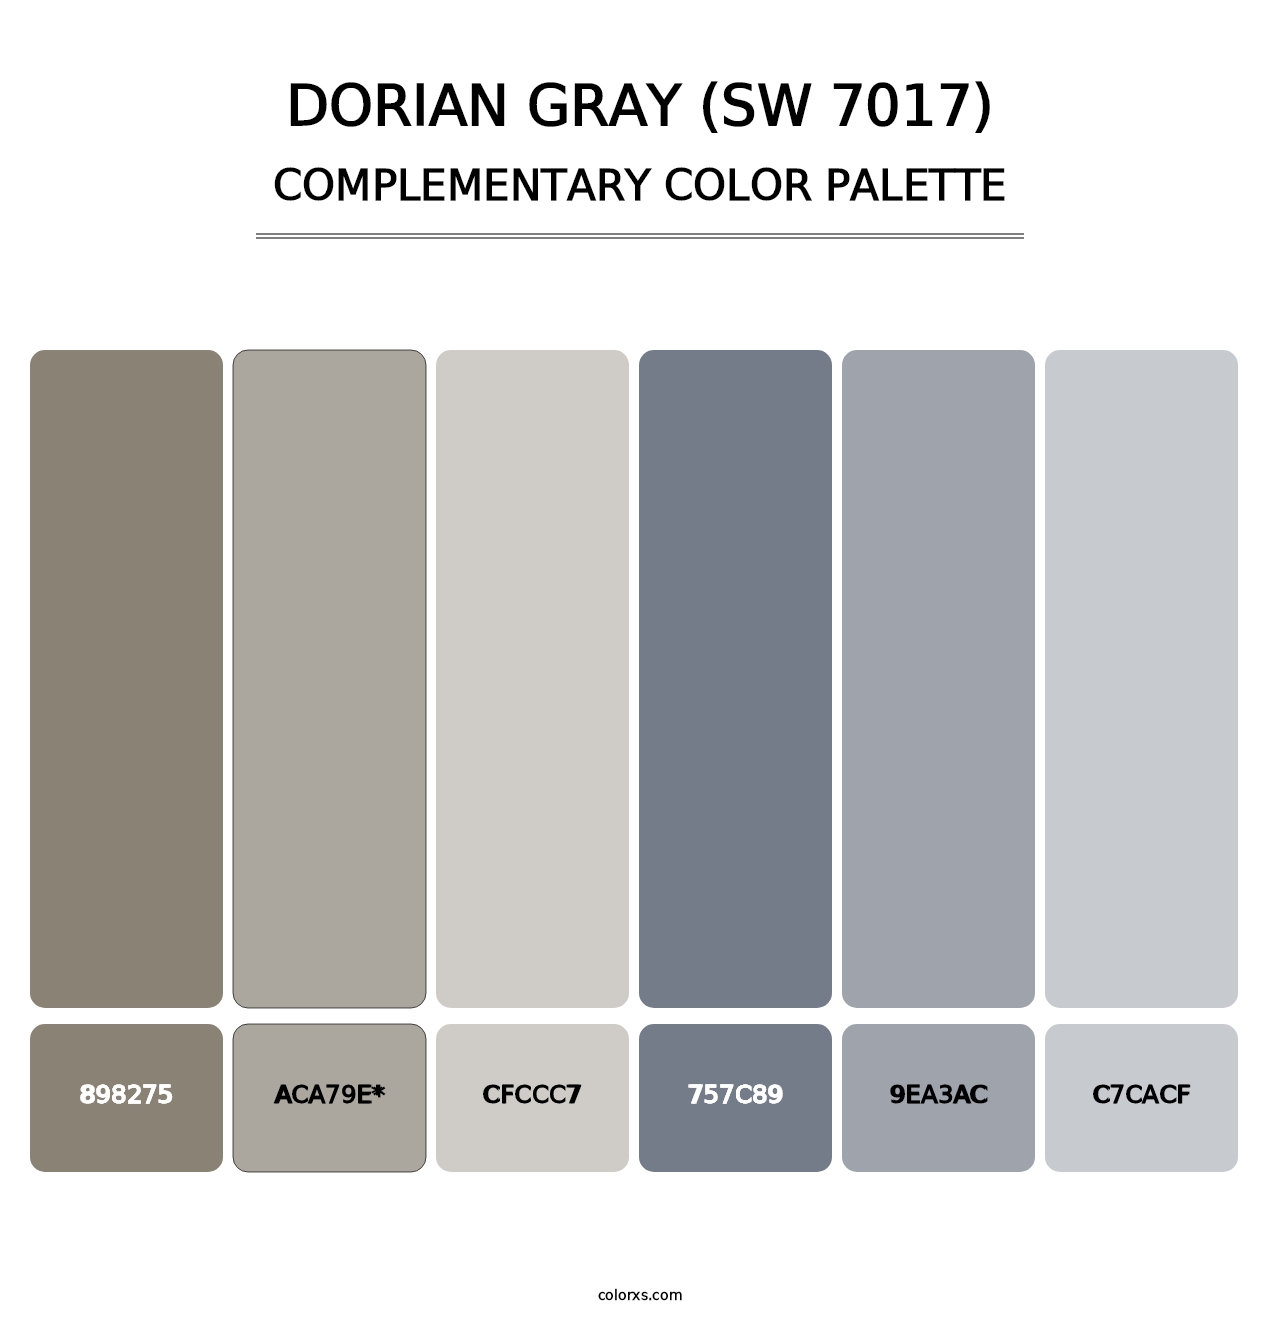 Dorian Gray (SW 7017) - Complementary Color Palette